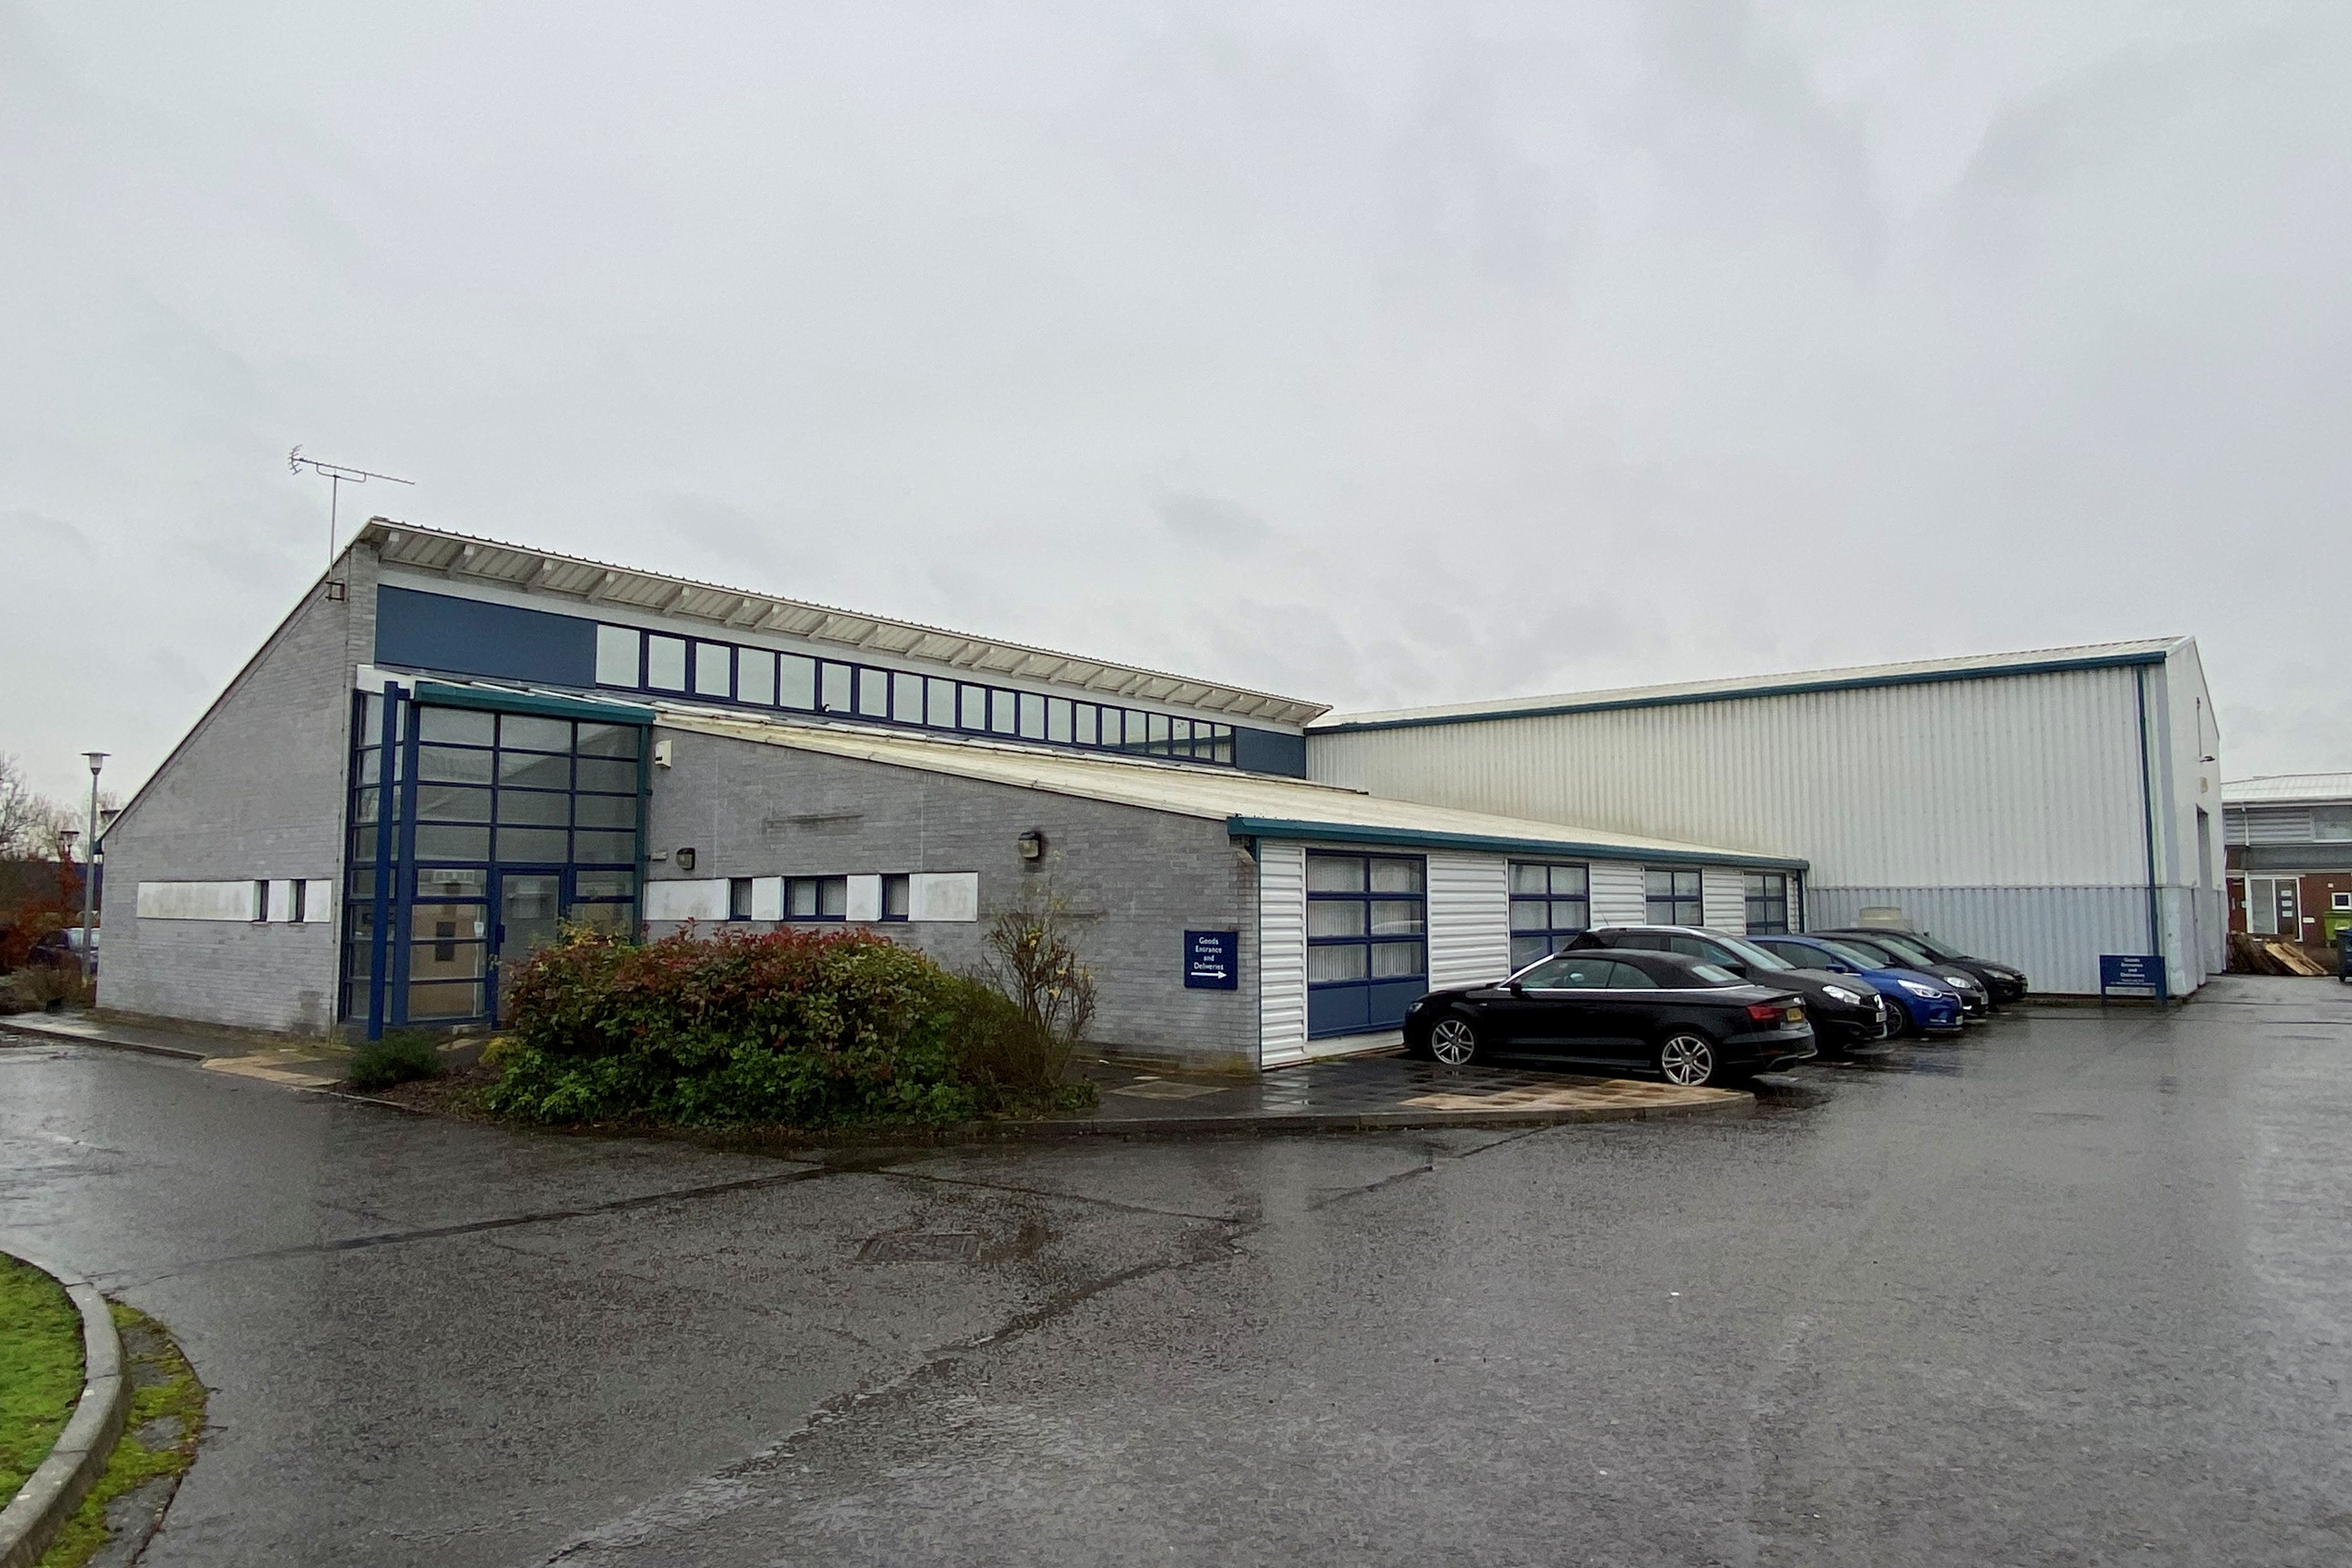 MAJOR ELY OFFICE AND WAREHOUSE COMPLEX SOLD FOR Â£1.1 MILLION